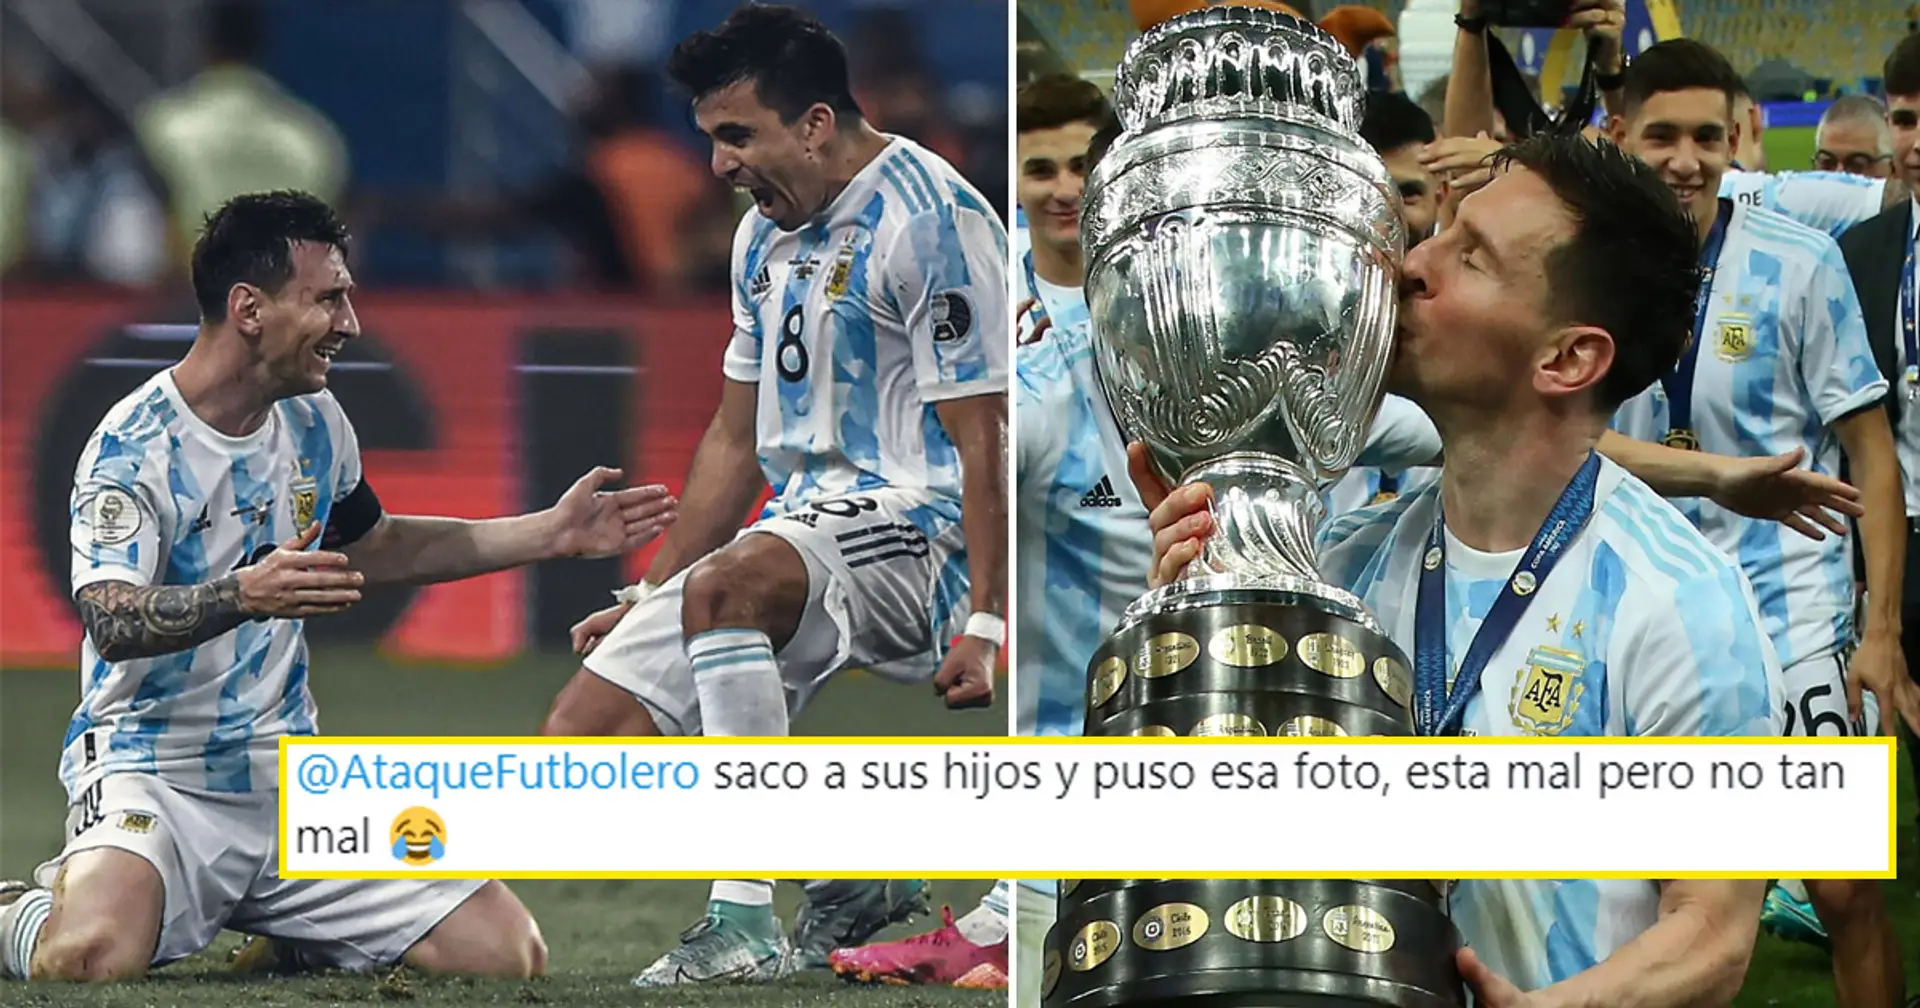 'It's wrong but not that wrong': Wife confirms Marcos Acuna changed his phone background from his kids to snap of him and Messi winning Copa America